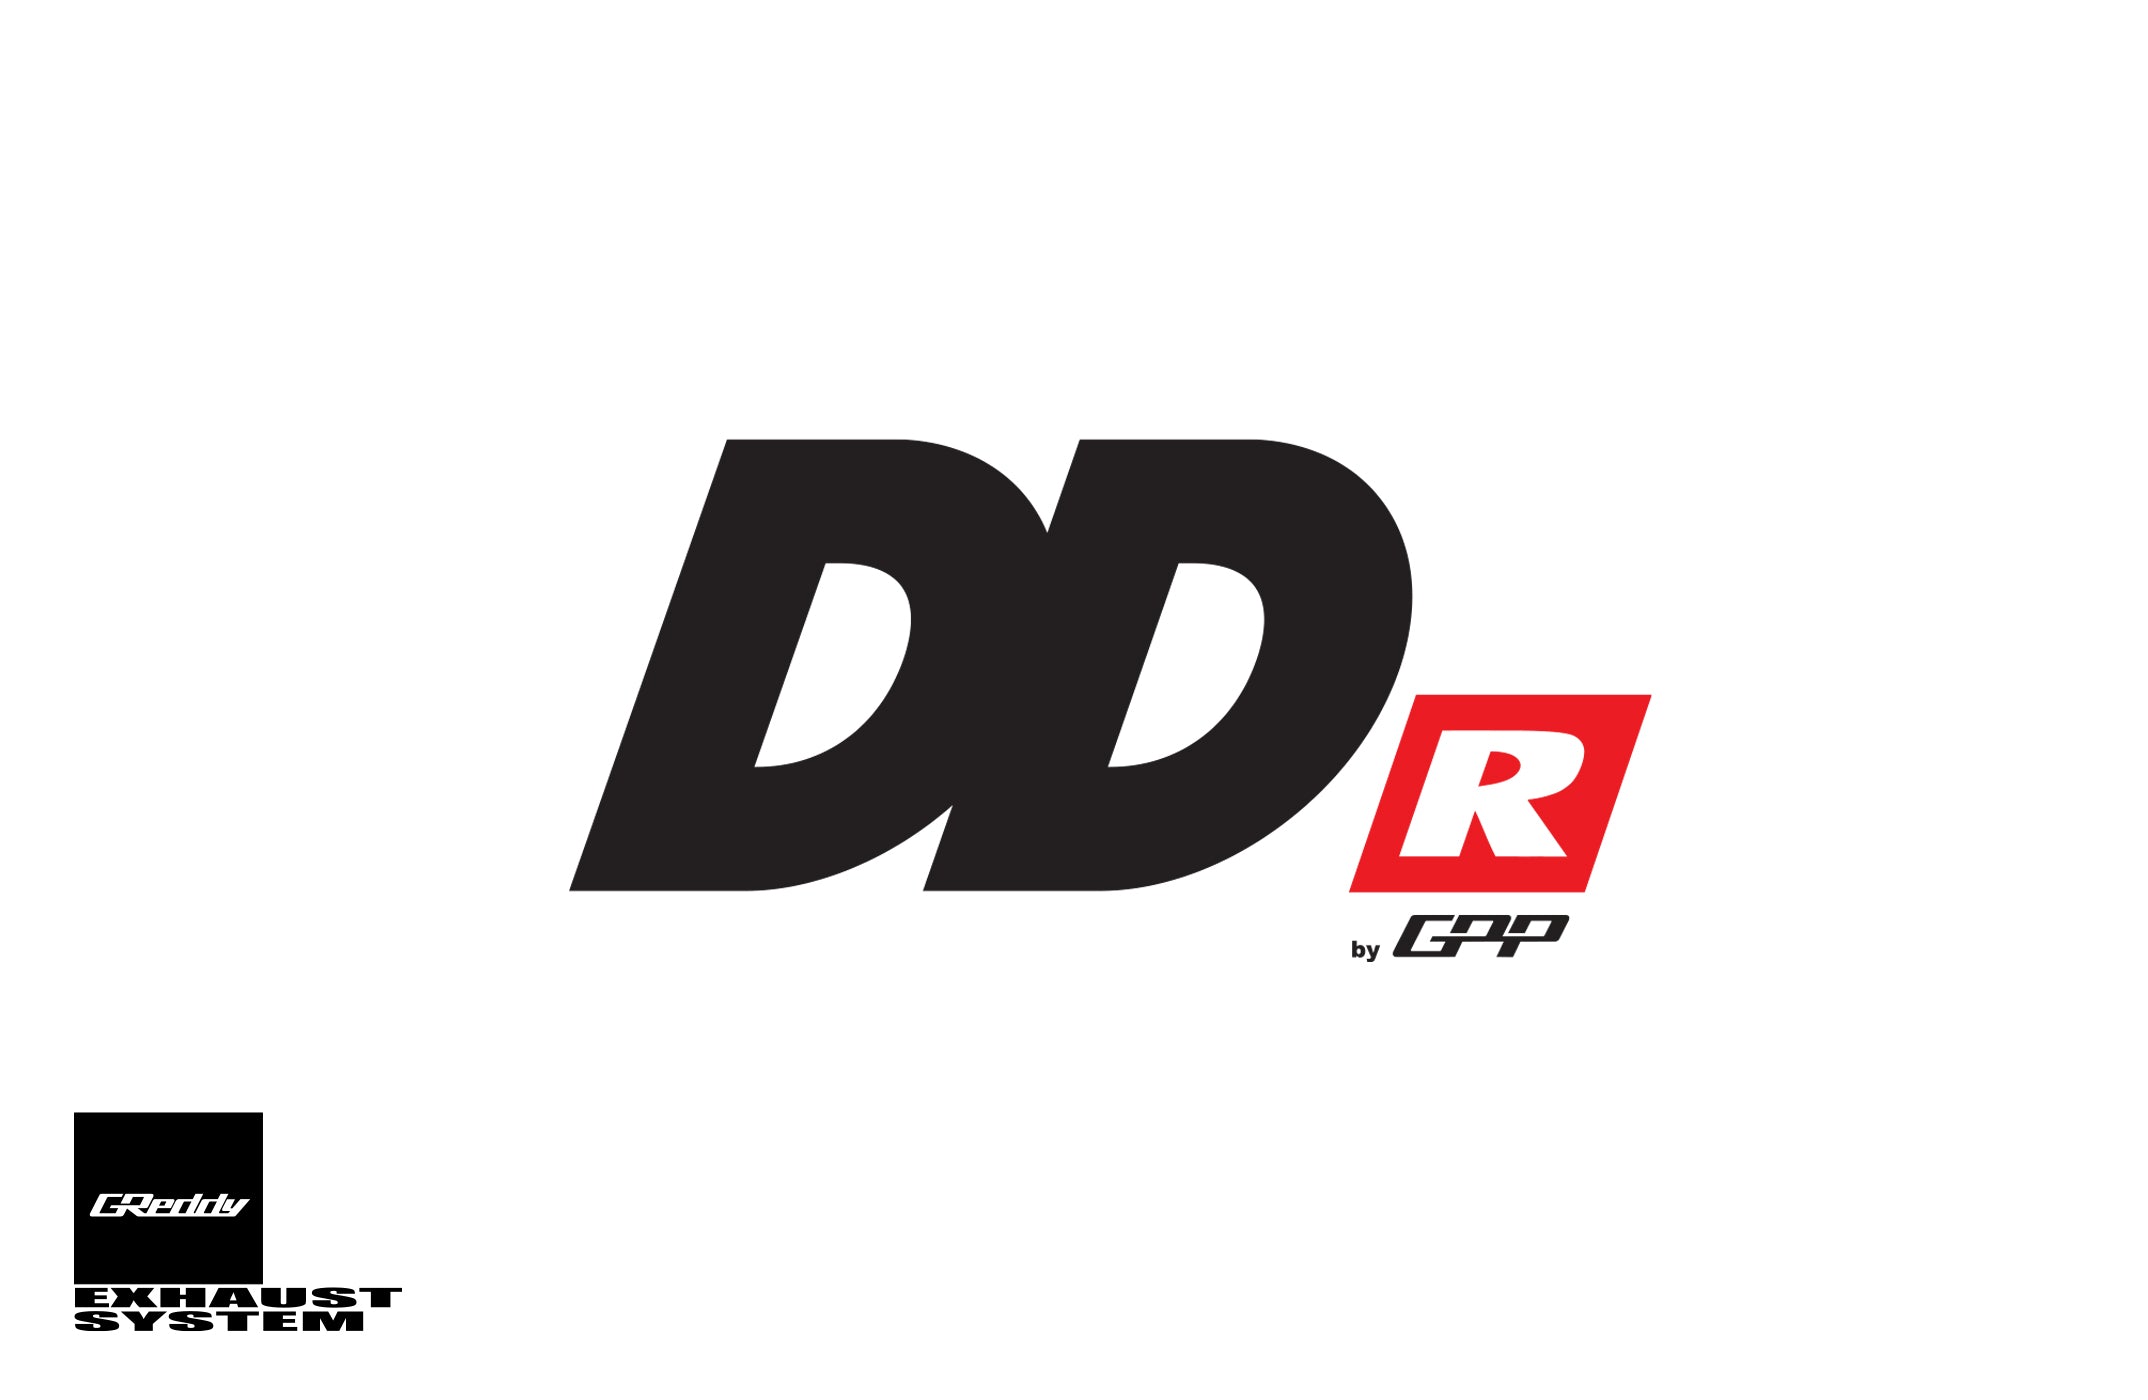 GPP DD-R Exhaust Systems - application specific